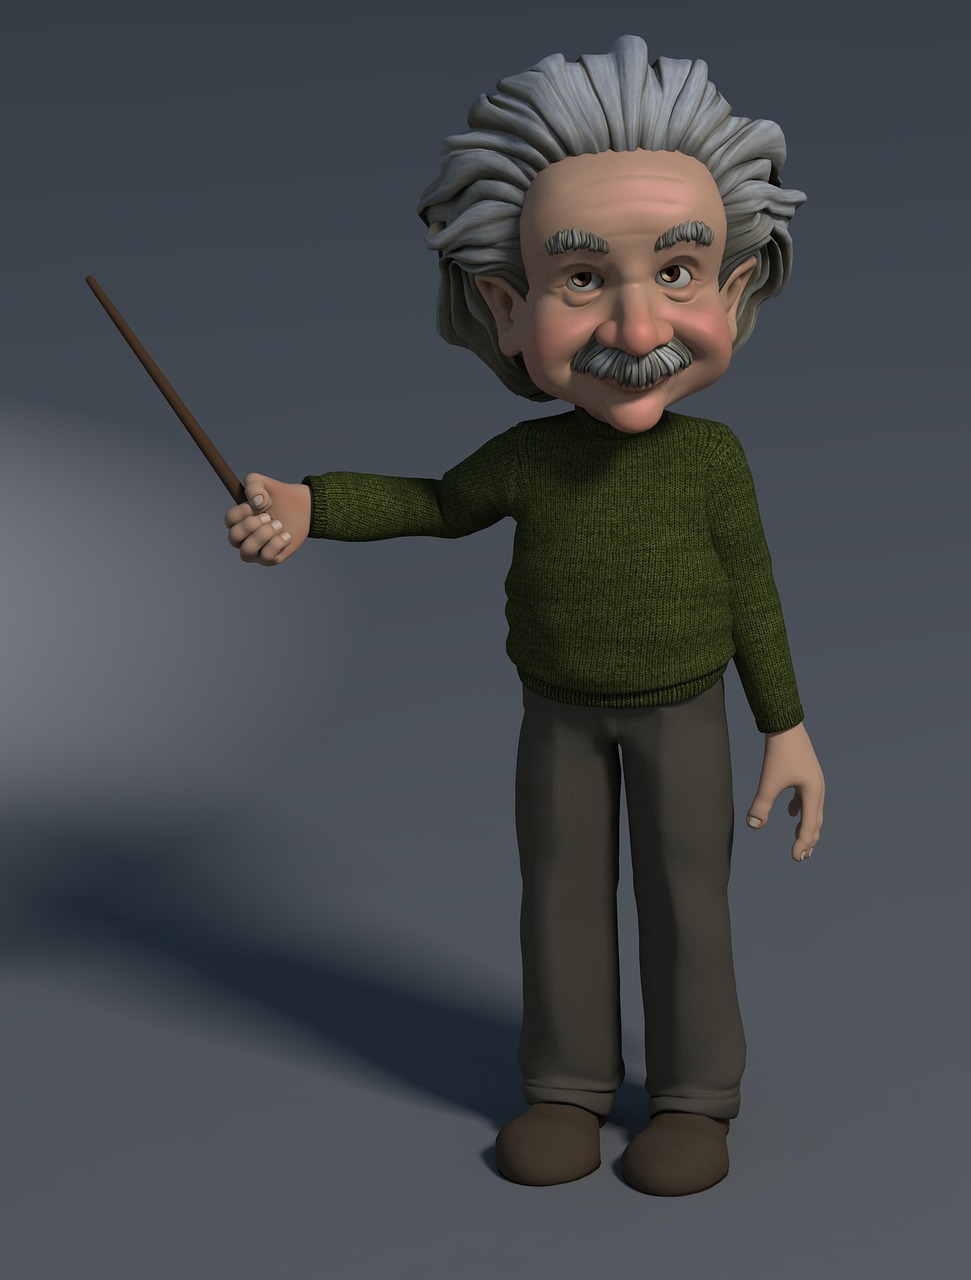 professor 3d figure pointing at free photo